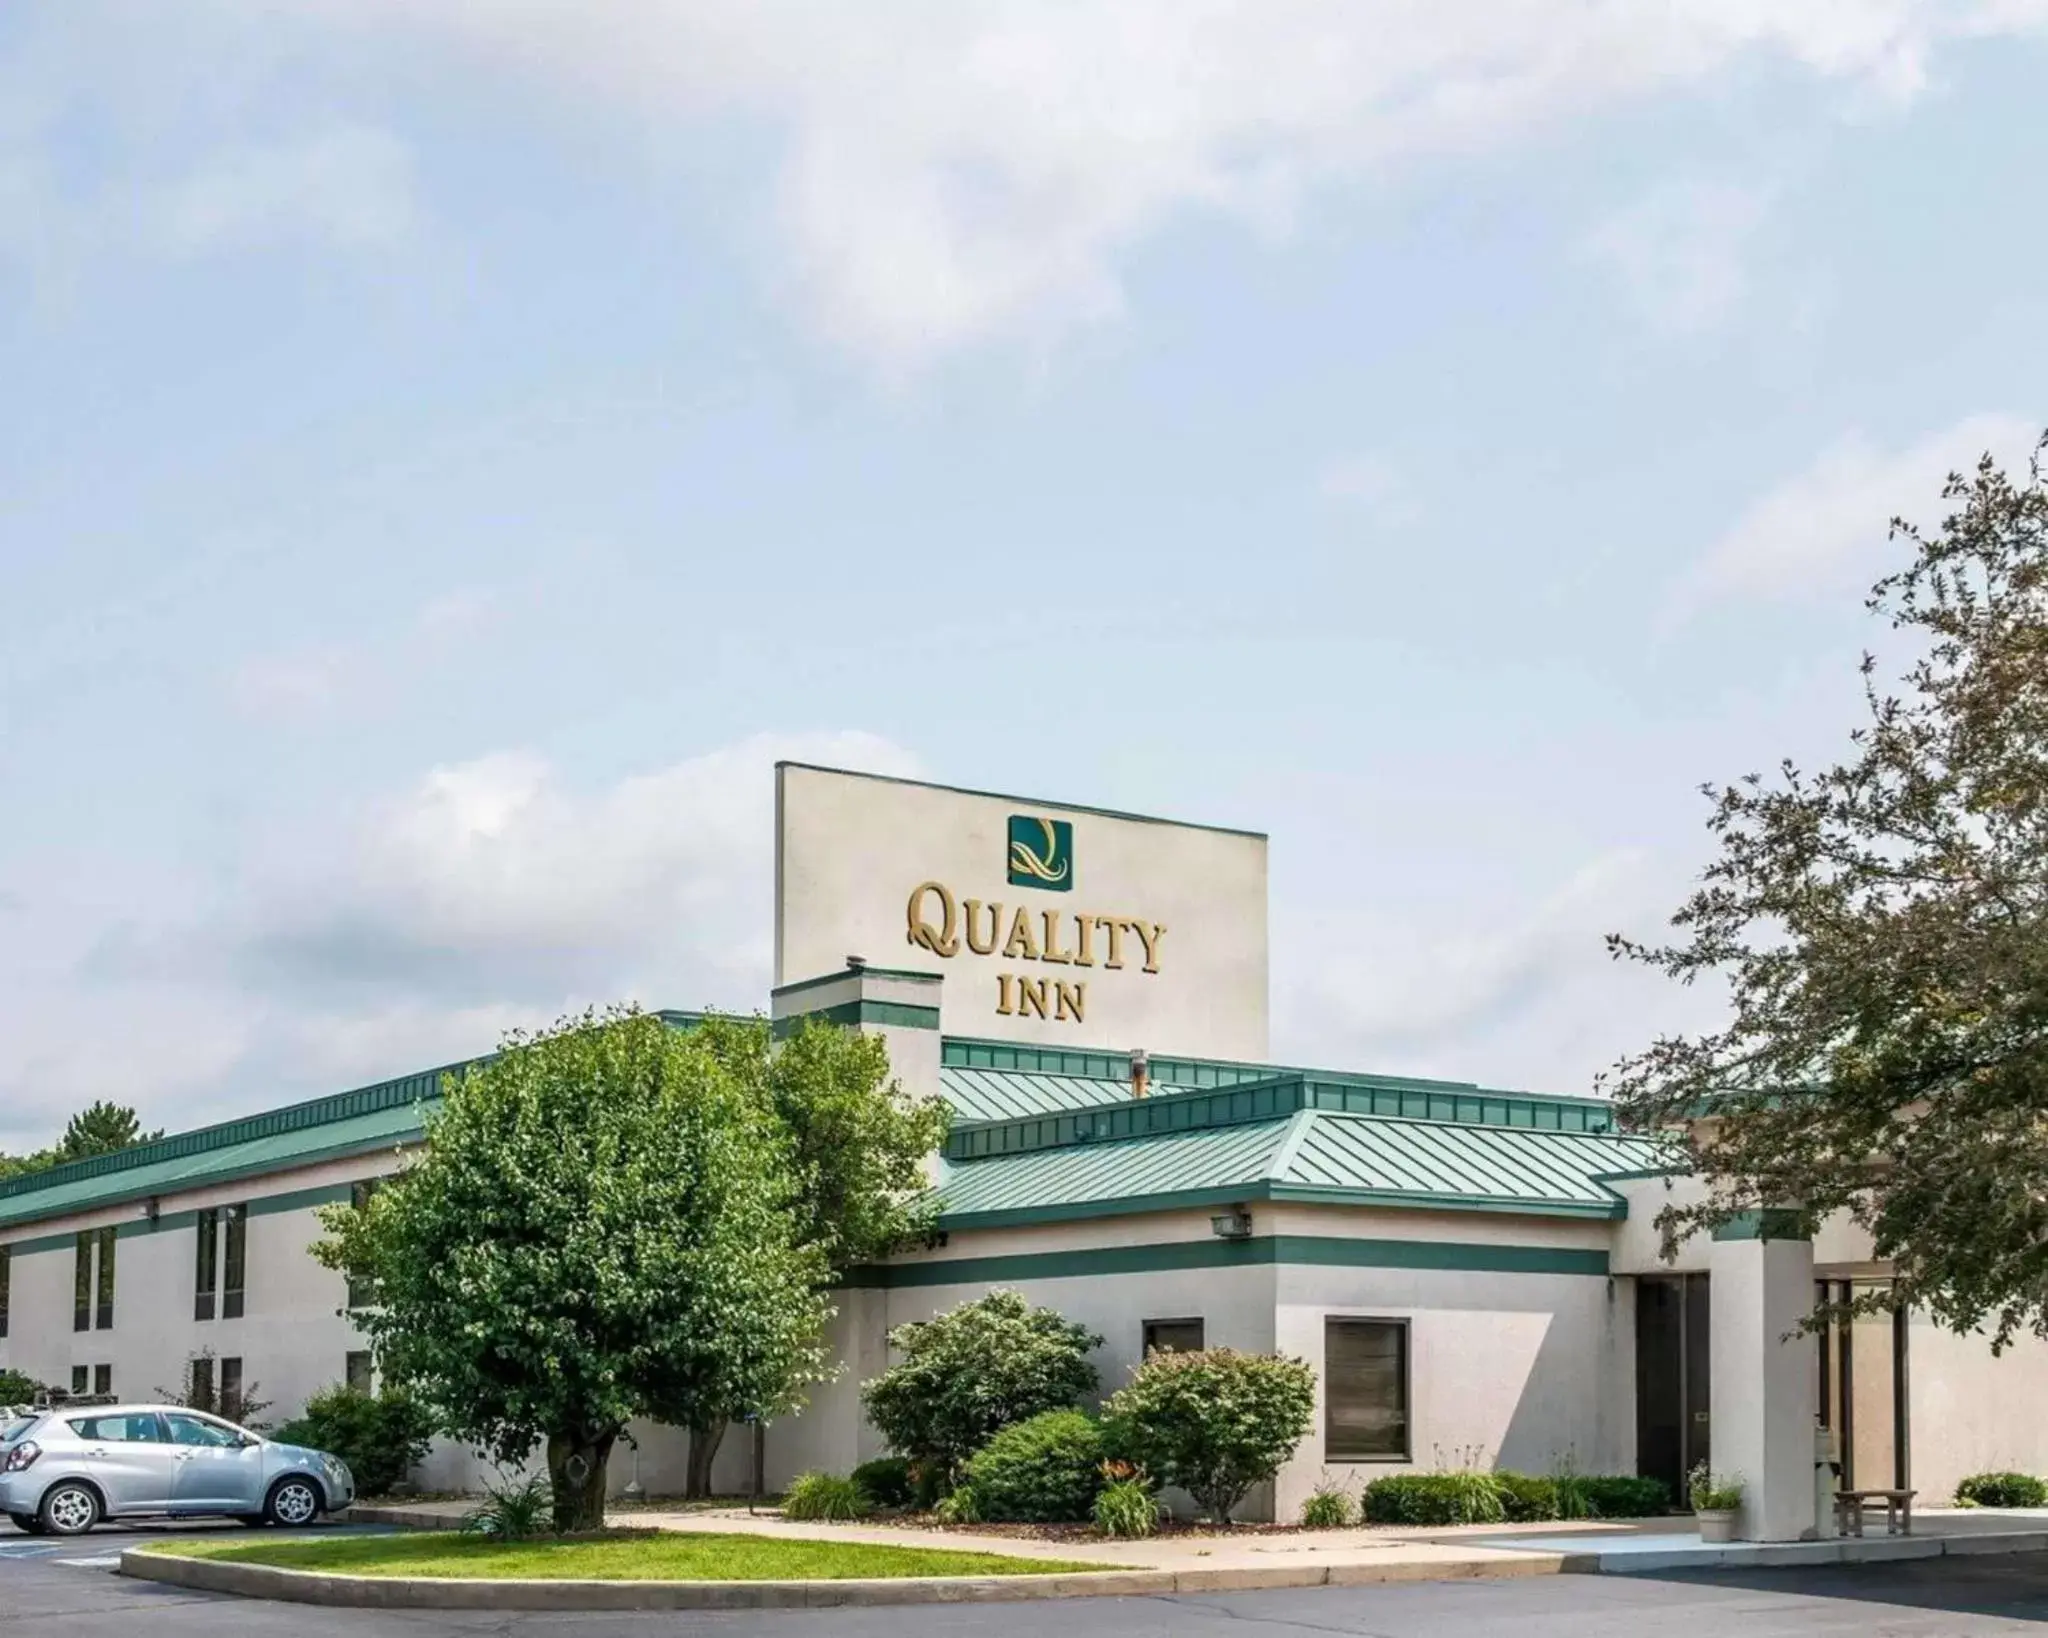 Property building in Quality Inn Rochester